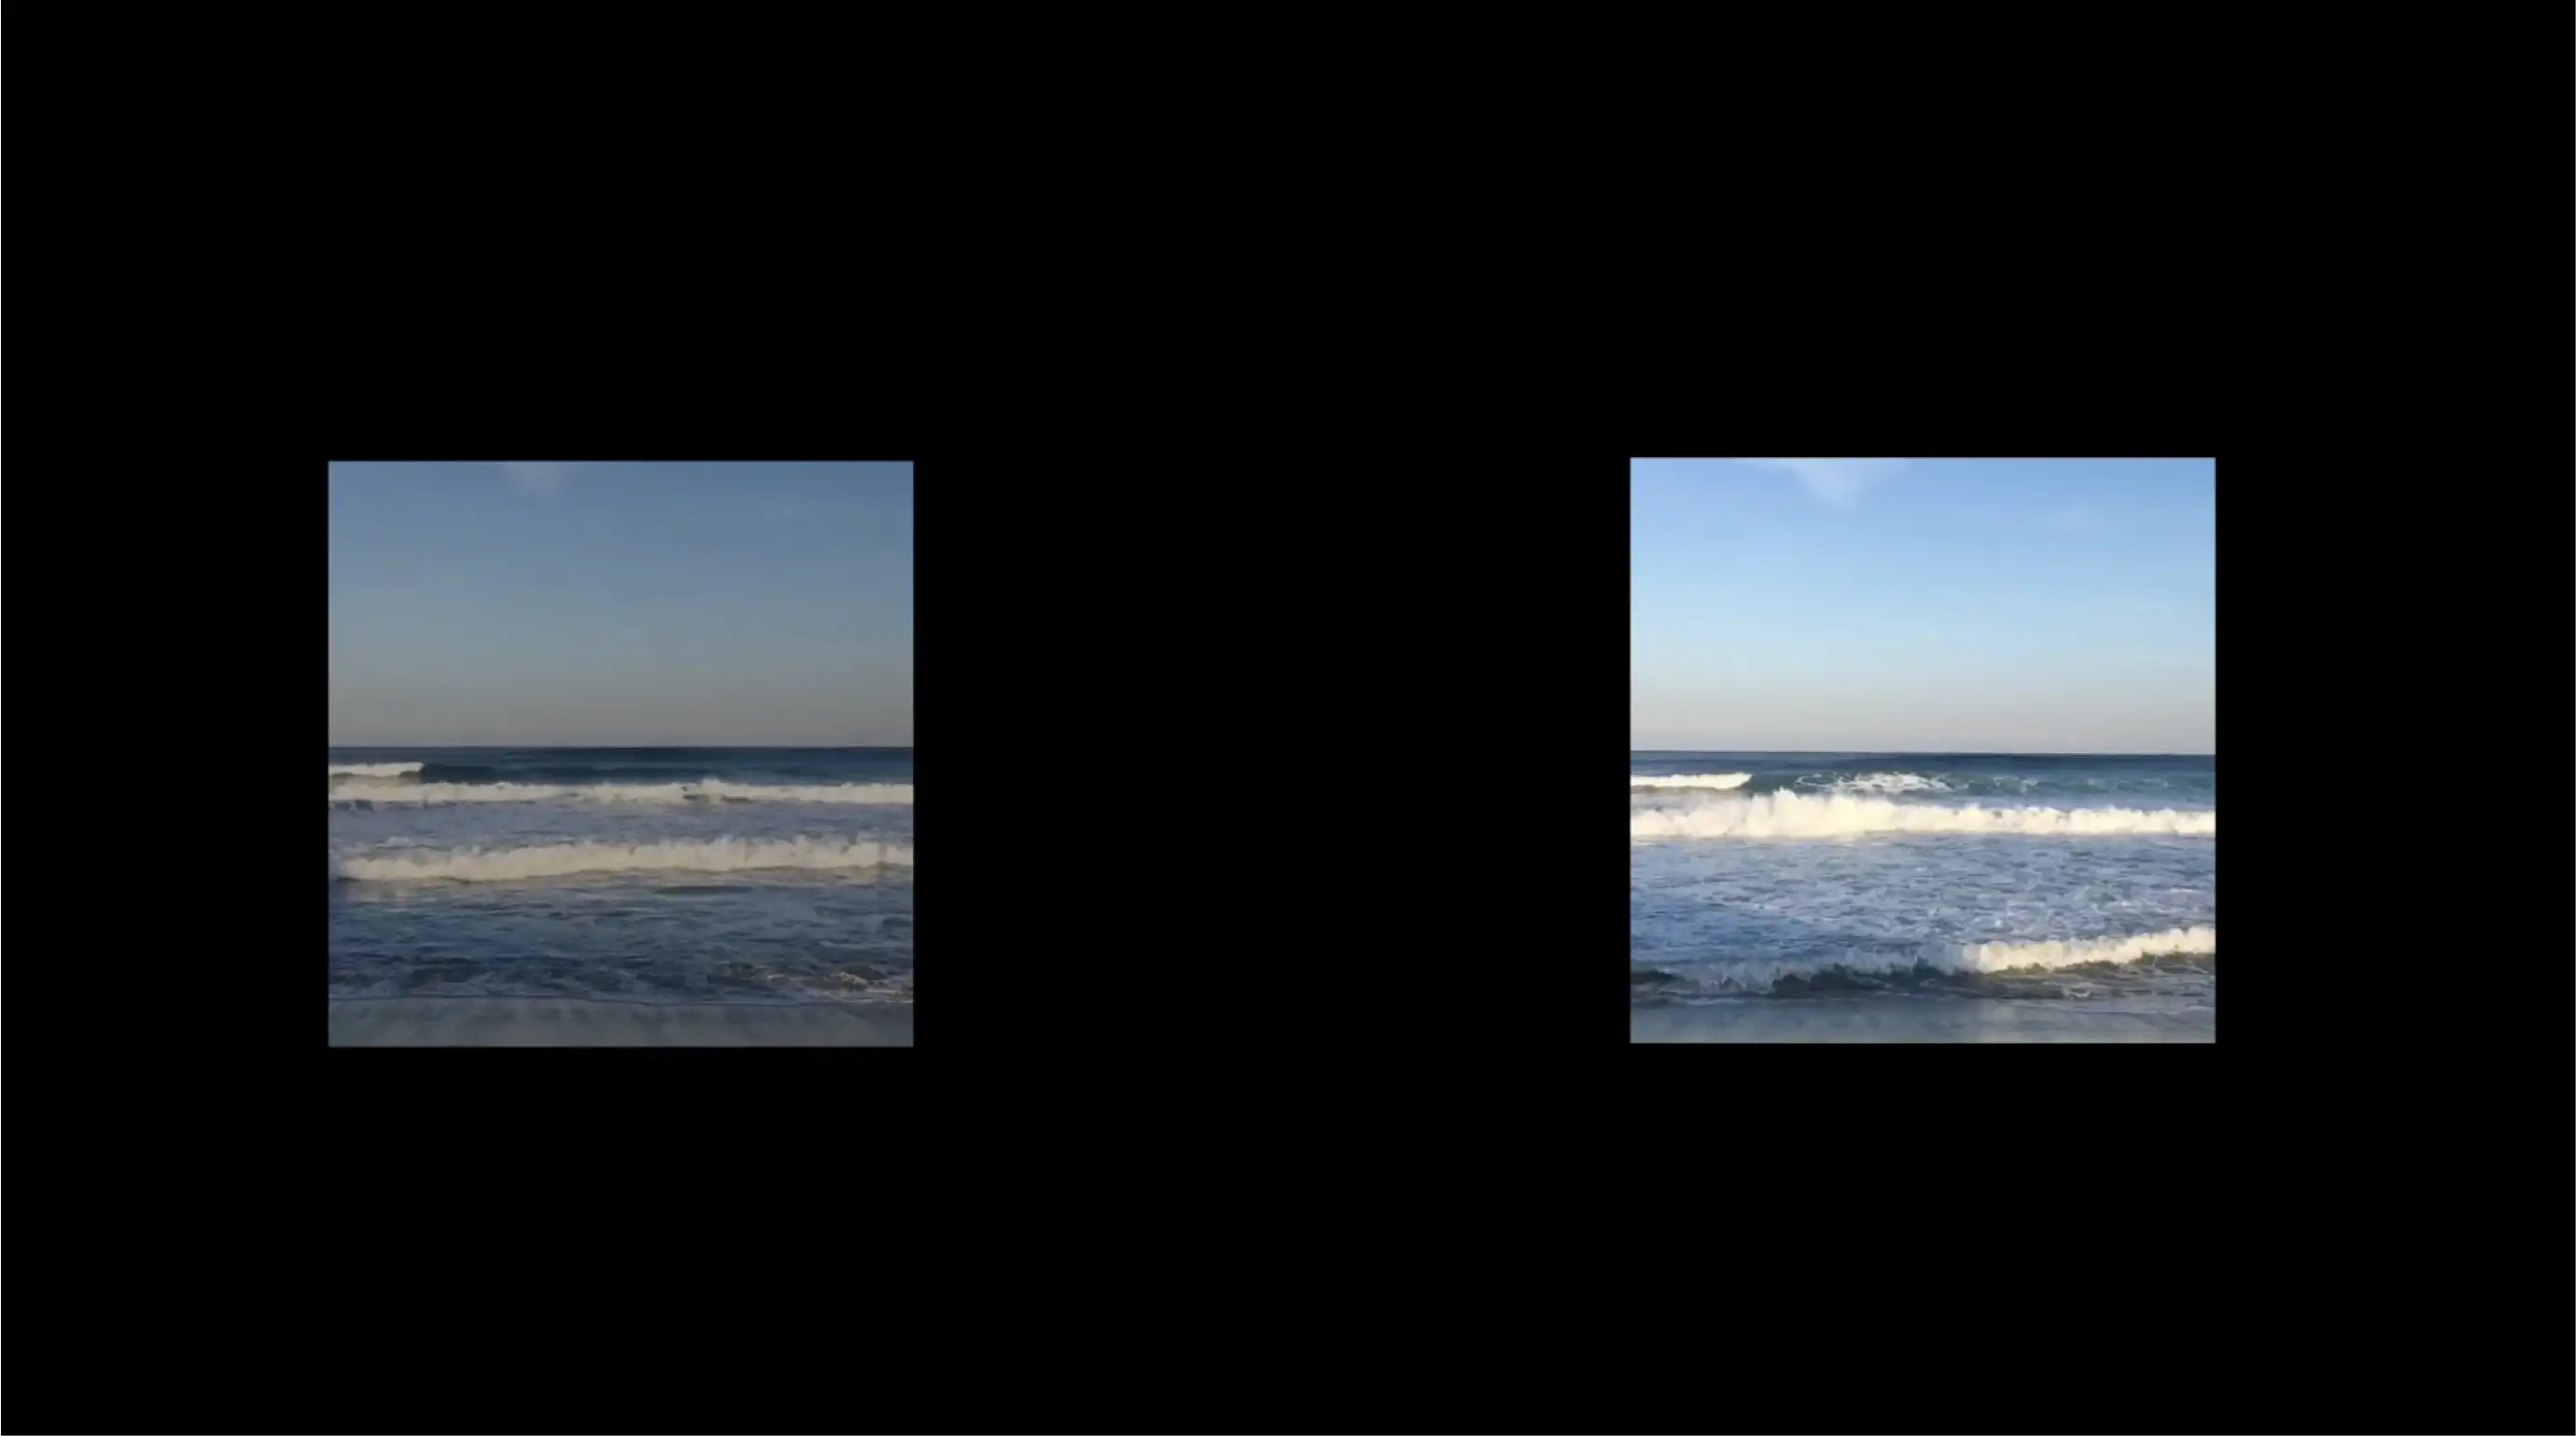 Two images of waves crashing over a blank, black background